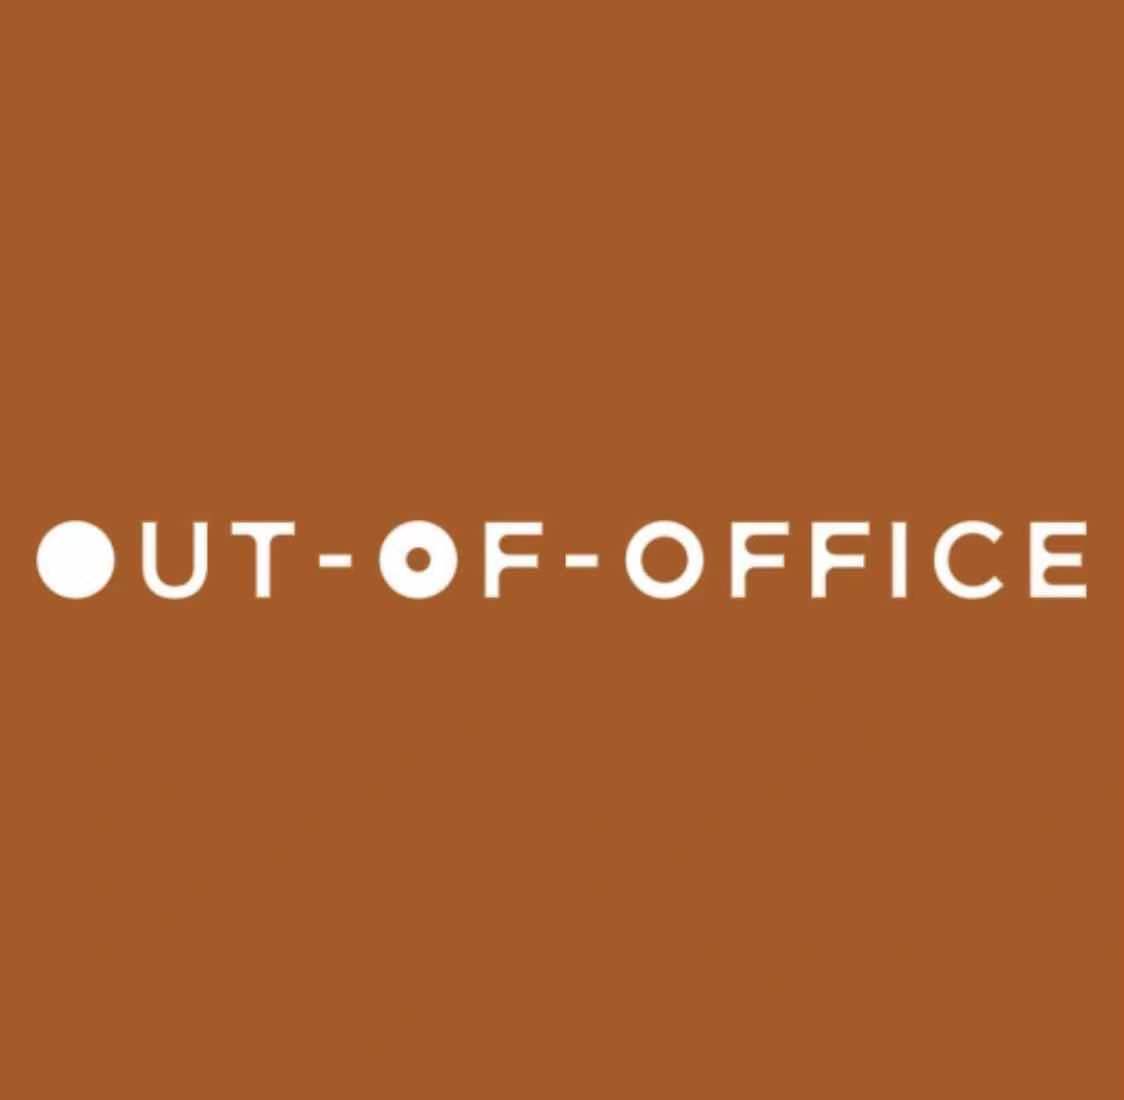 OUT-OF-OFFICE